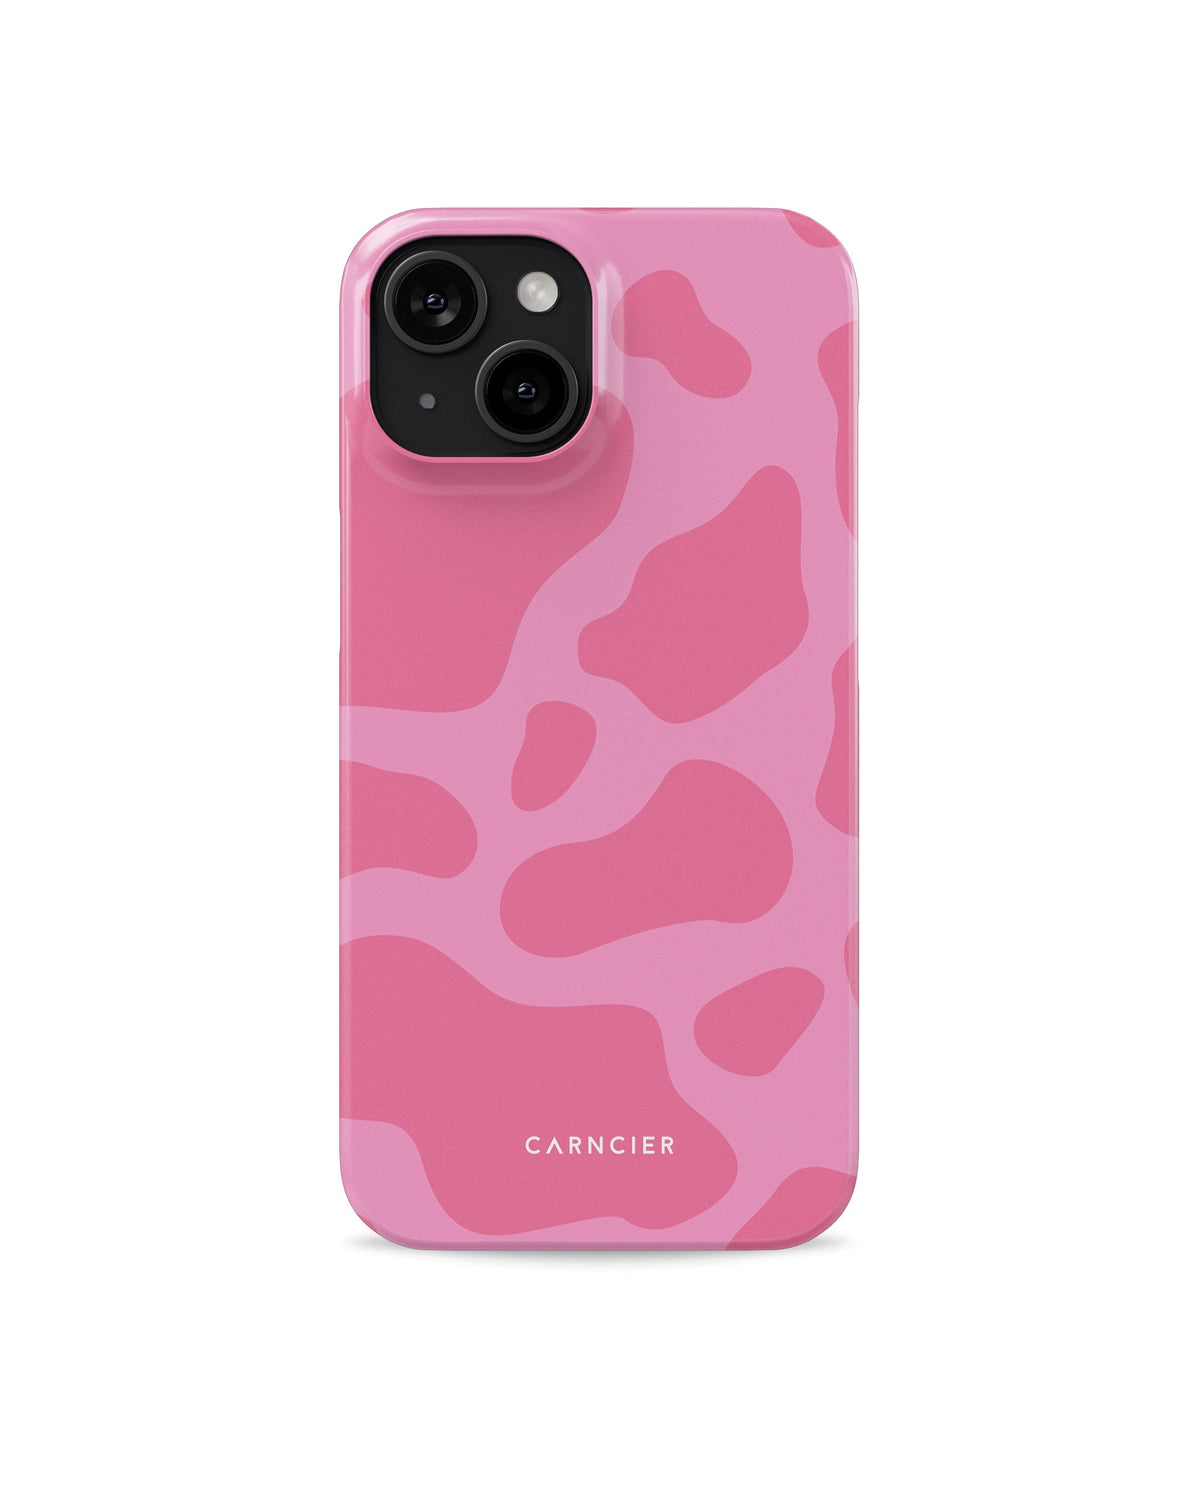 iPhone Case Mobile Phone Cases Pink Lemonade